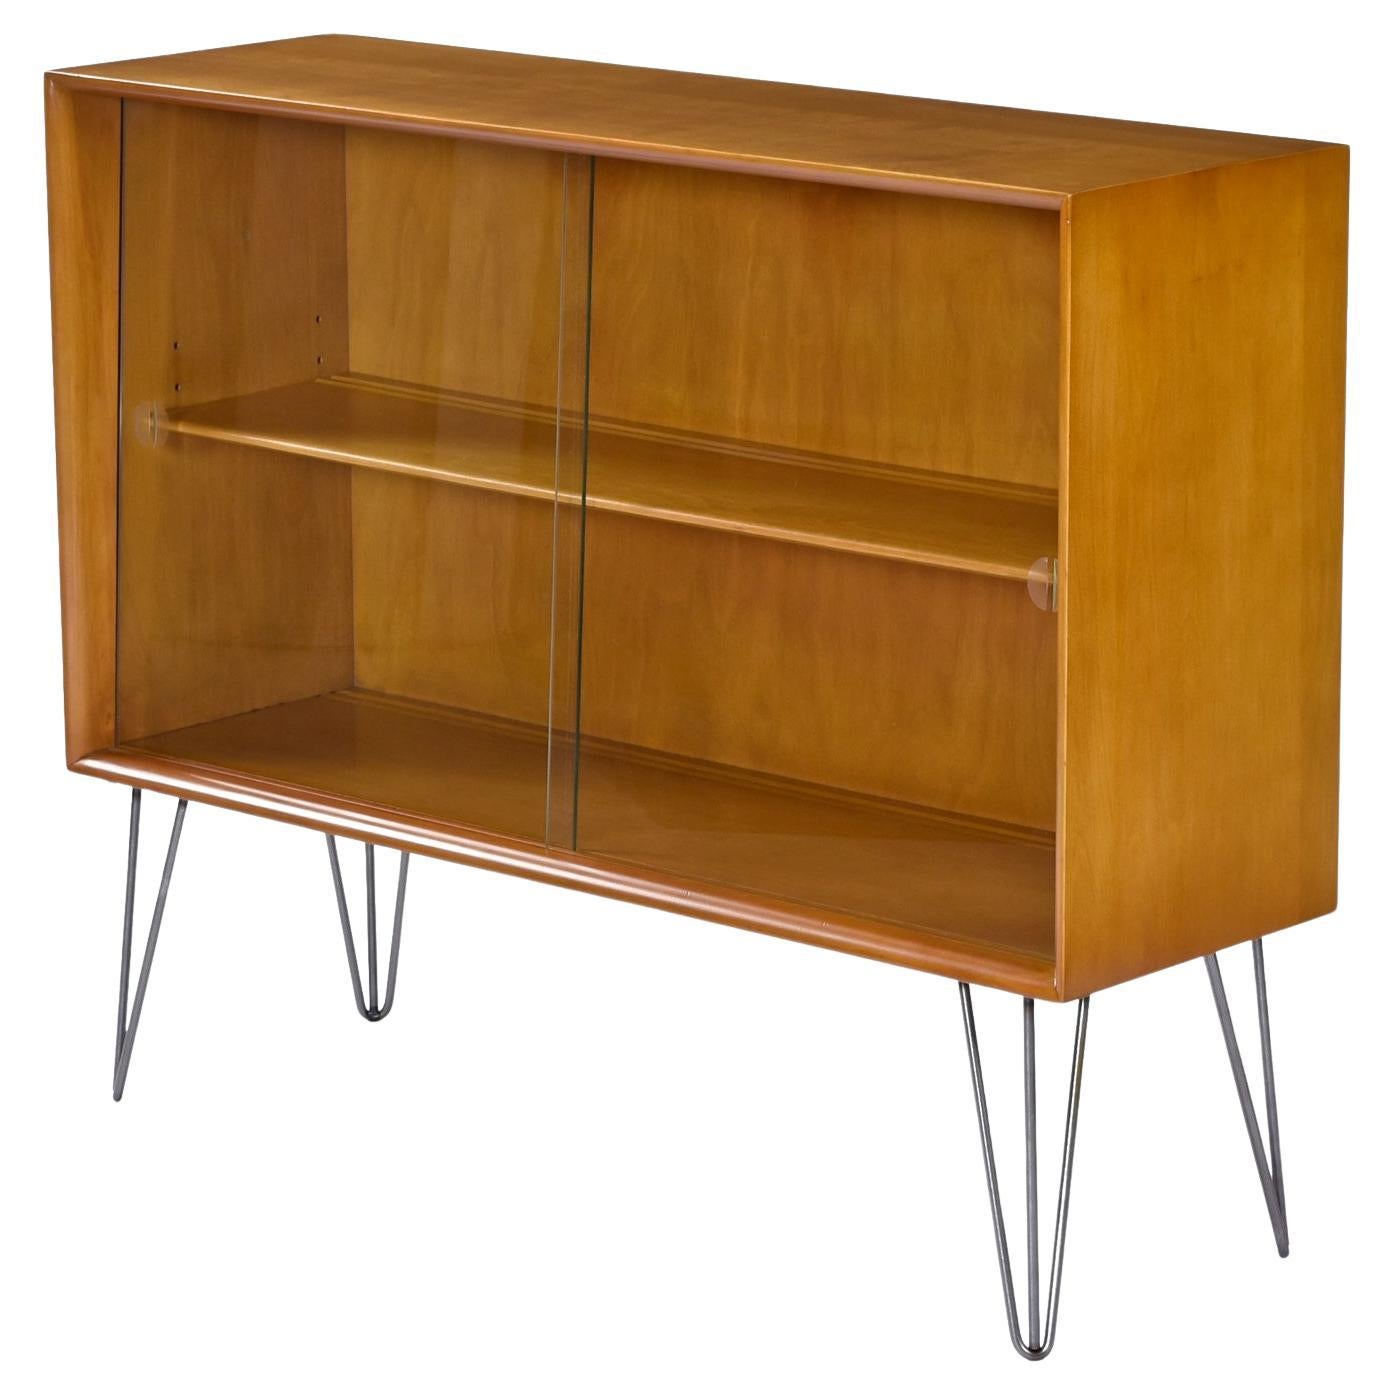 Our shop elevated (literally) this Incredibly versatile Heywood Wakefield display hutch bar with a sleek set of 12